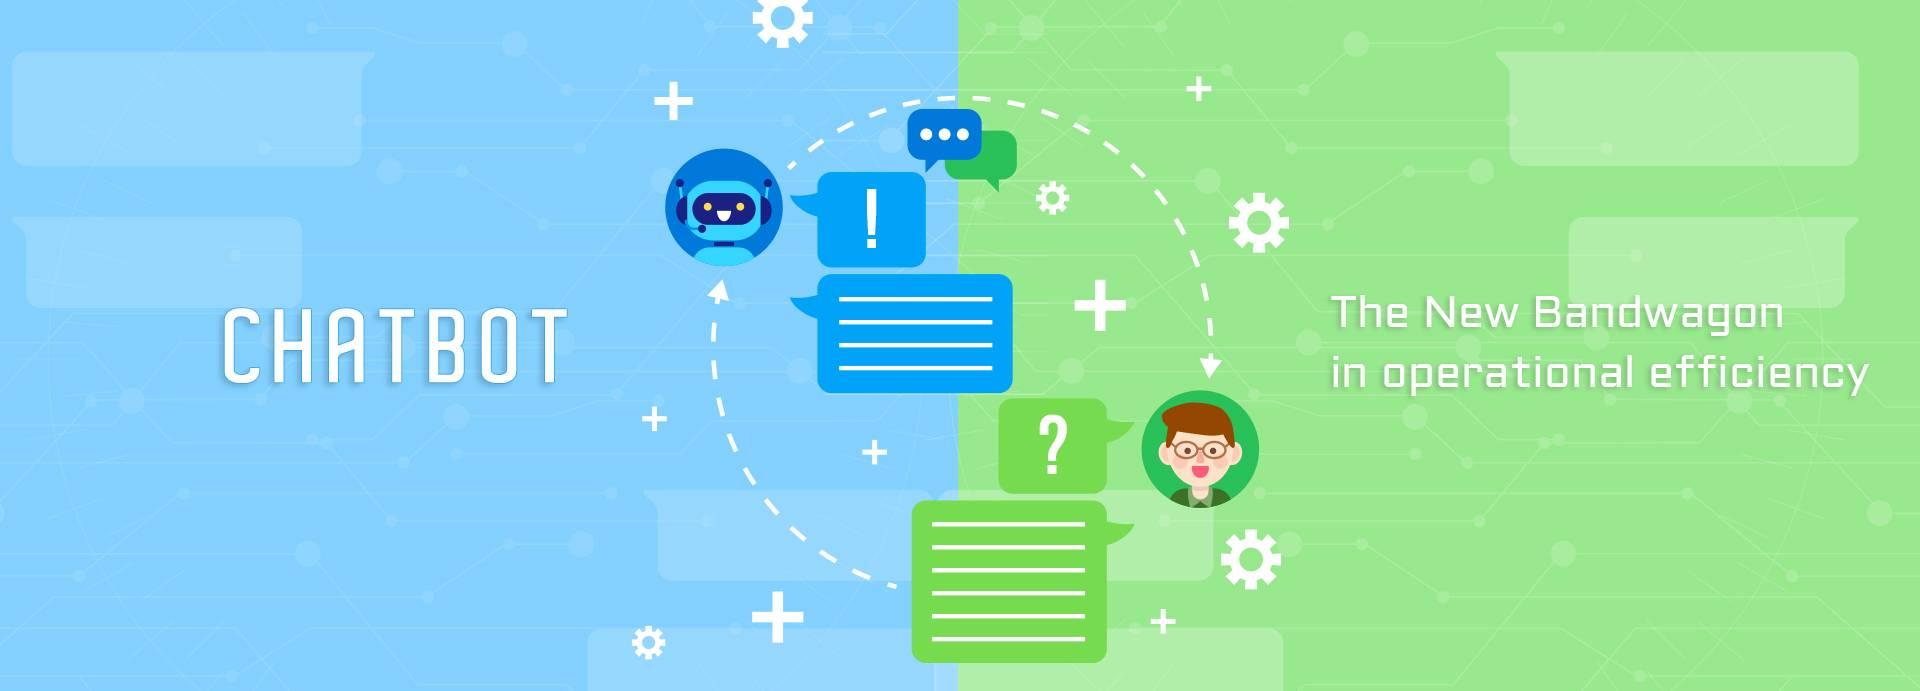 Chatbot &#8211; The New Bandwagon in operational efficiency